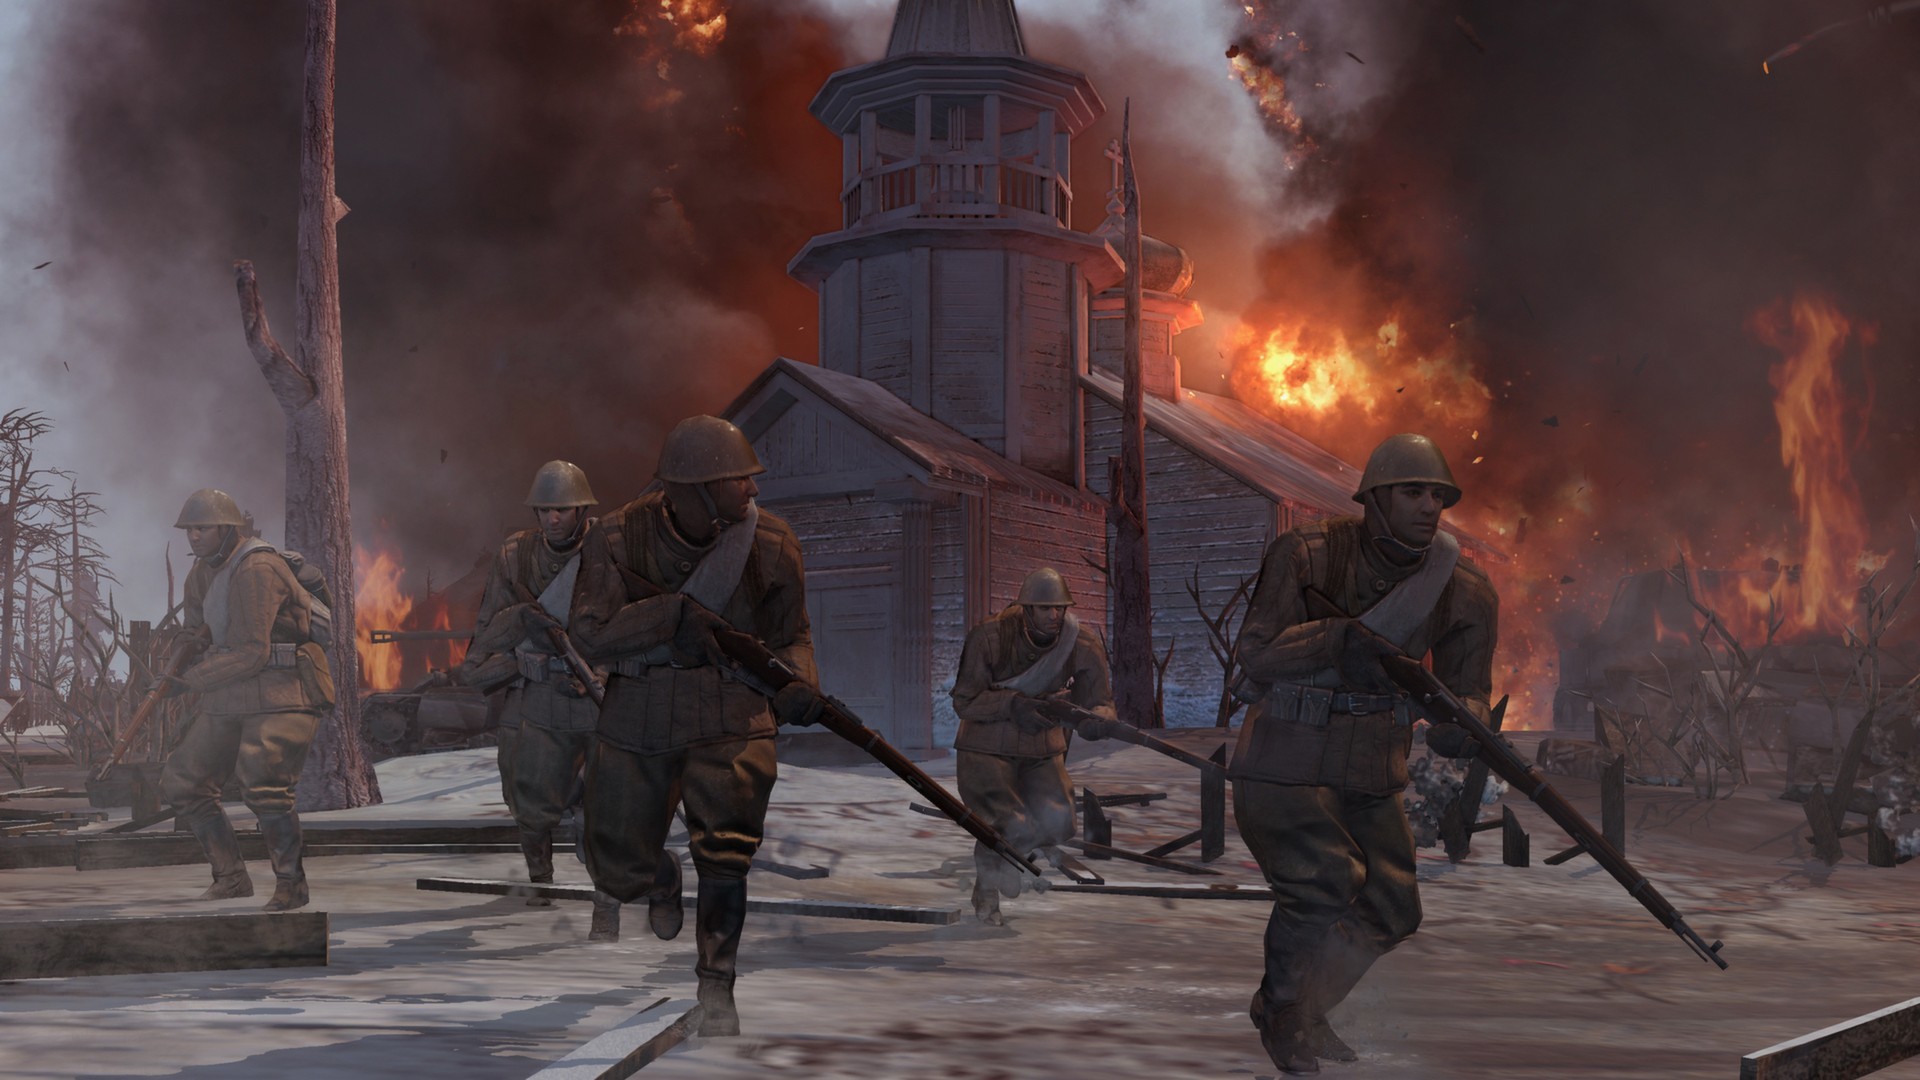 Company of heroes 2 - case blue mission pack download